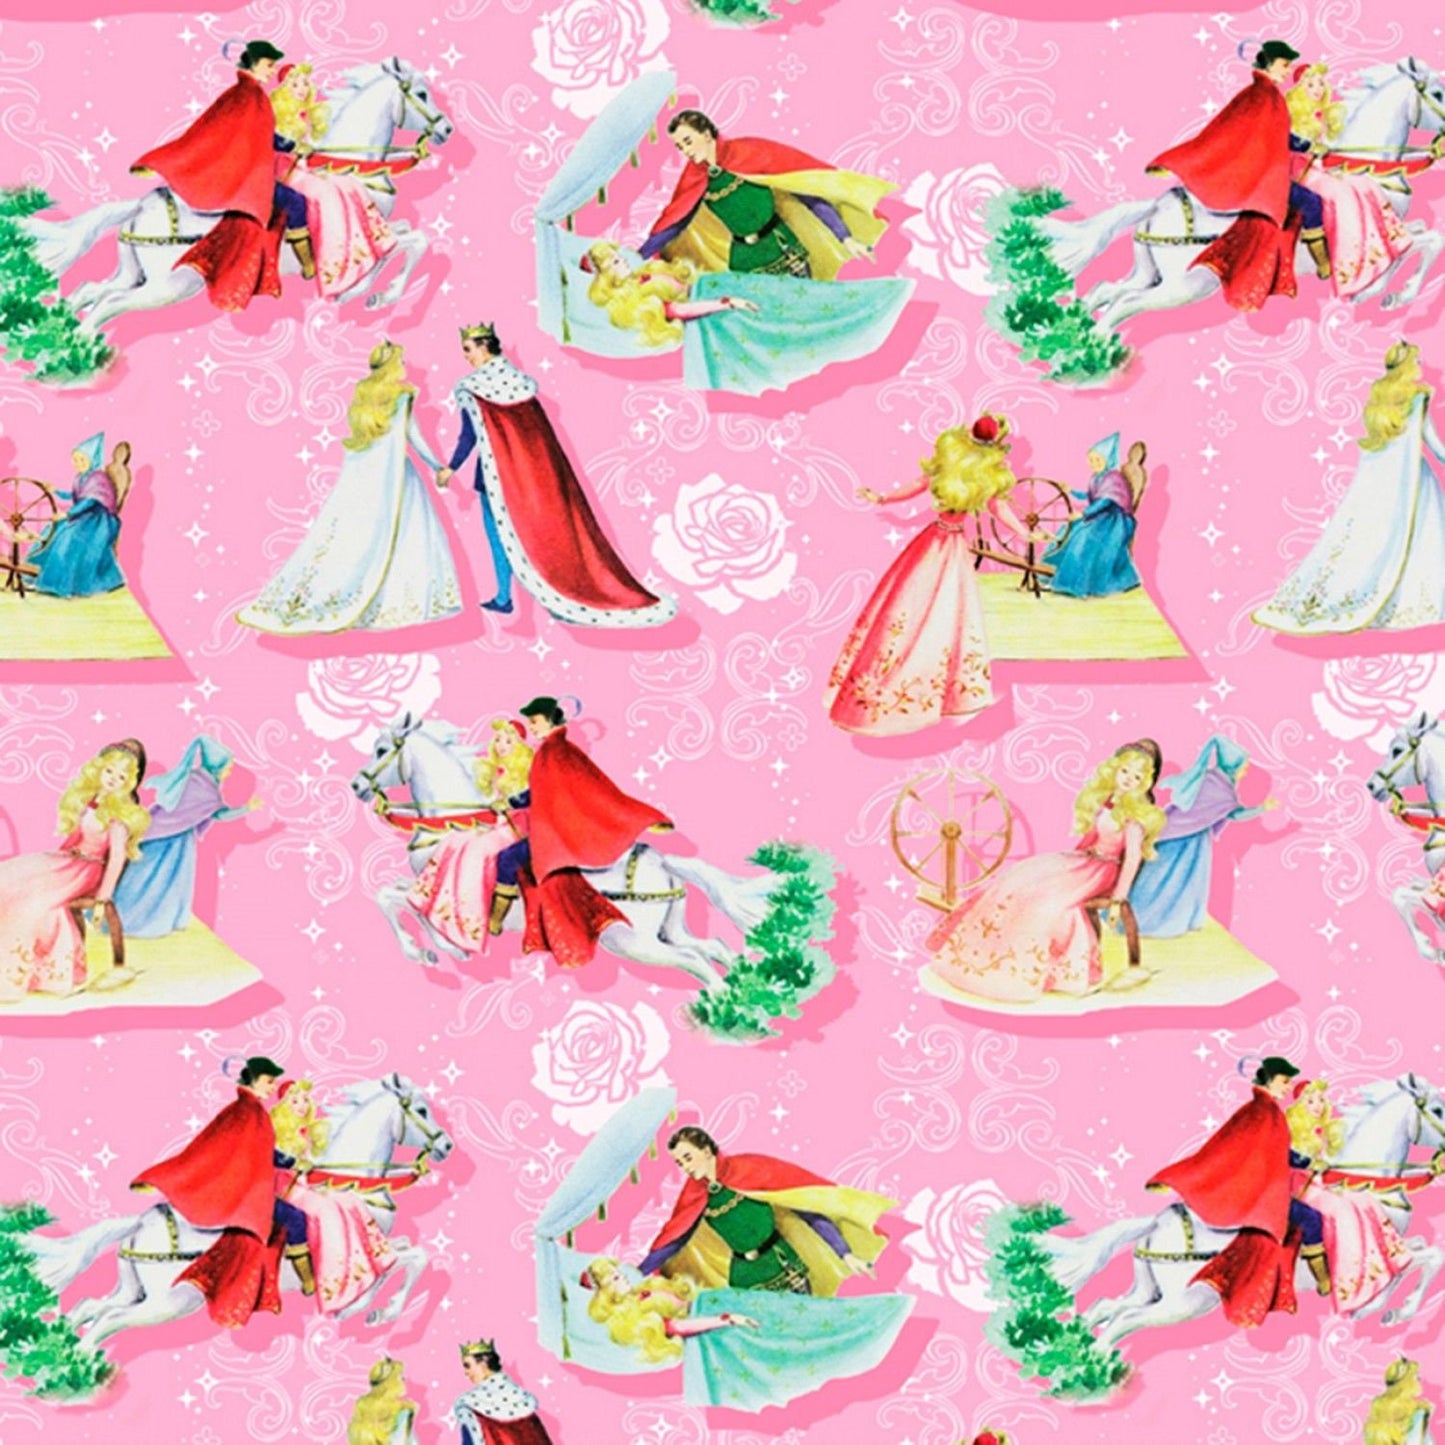 Vintage Storybooks from Four Seasons Sleeping Beauty Happily Ever After # BW01780C1 Cotton Woven Fabric